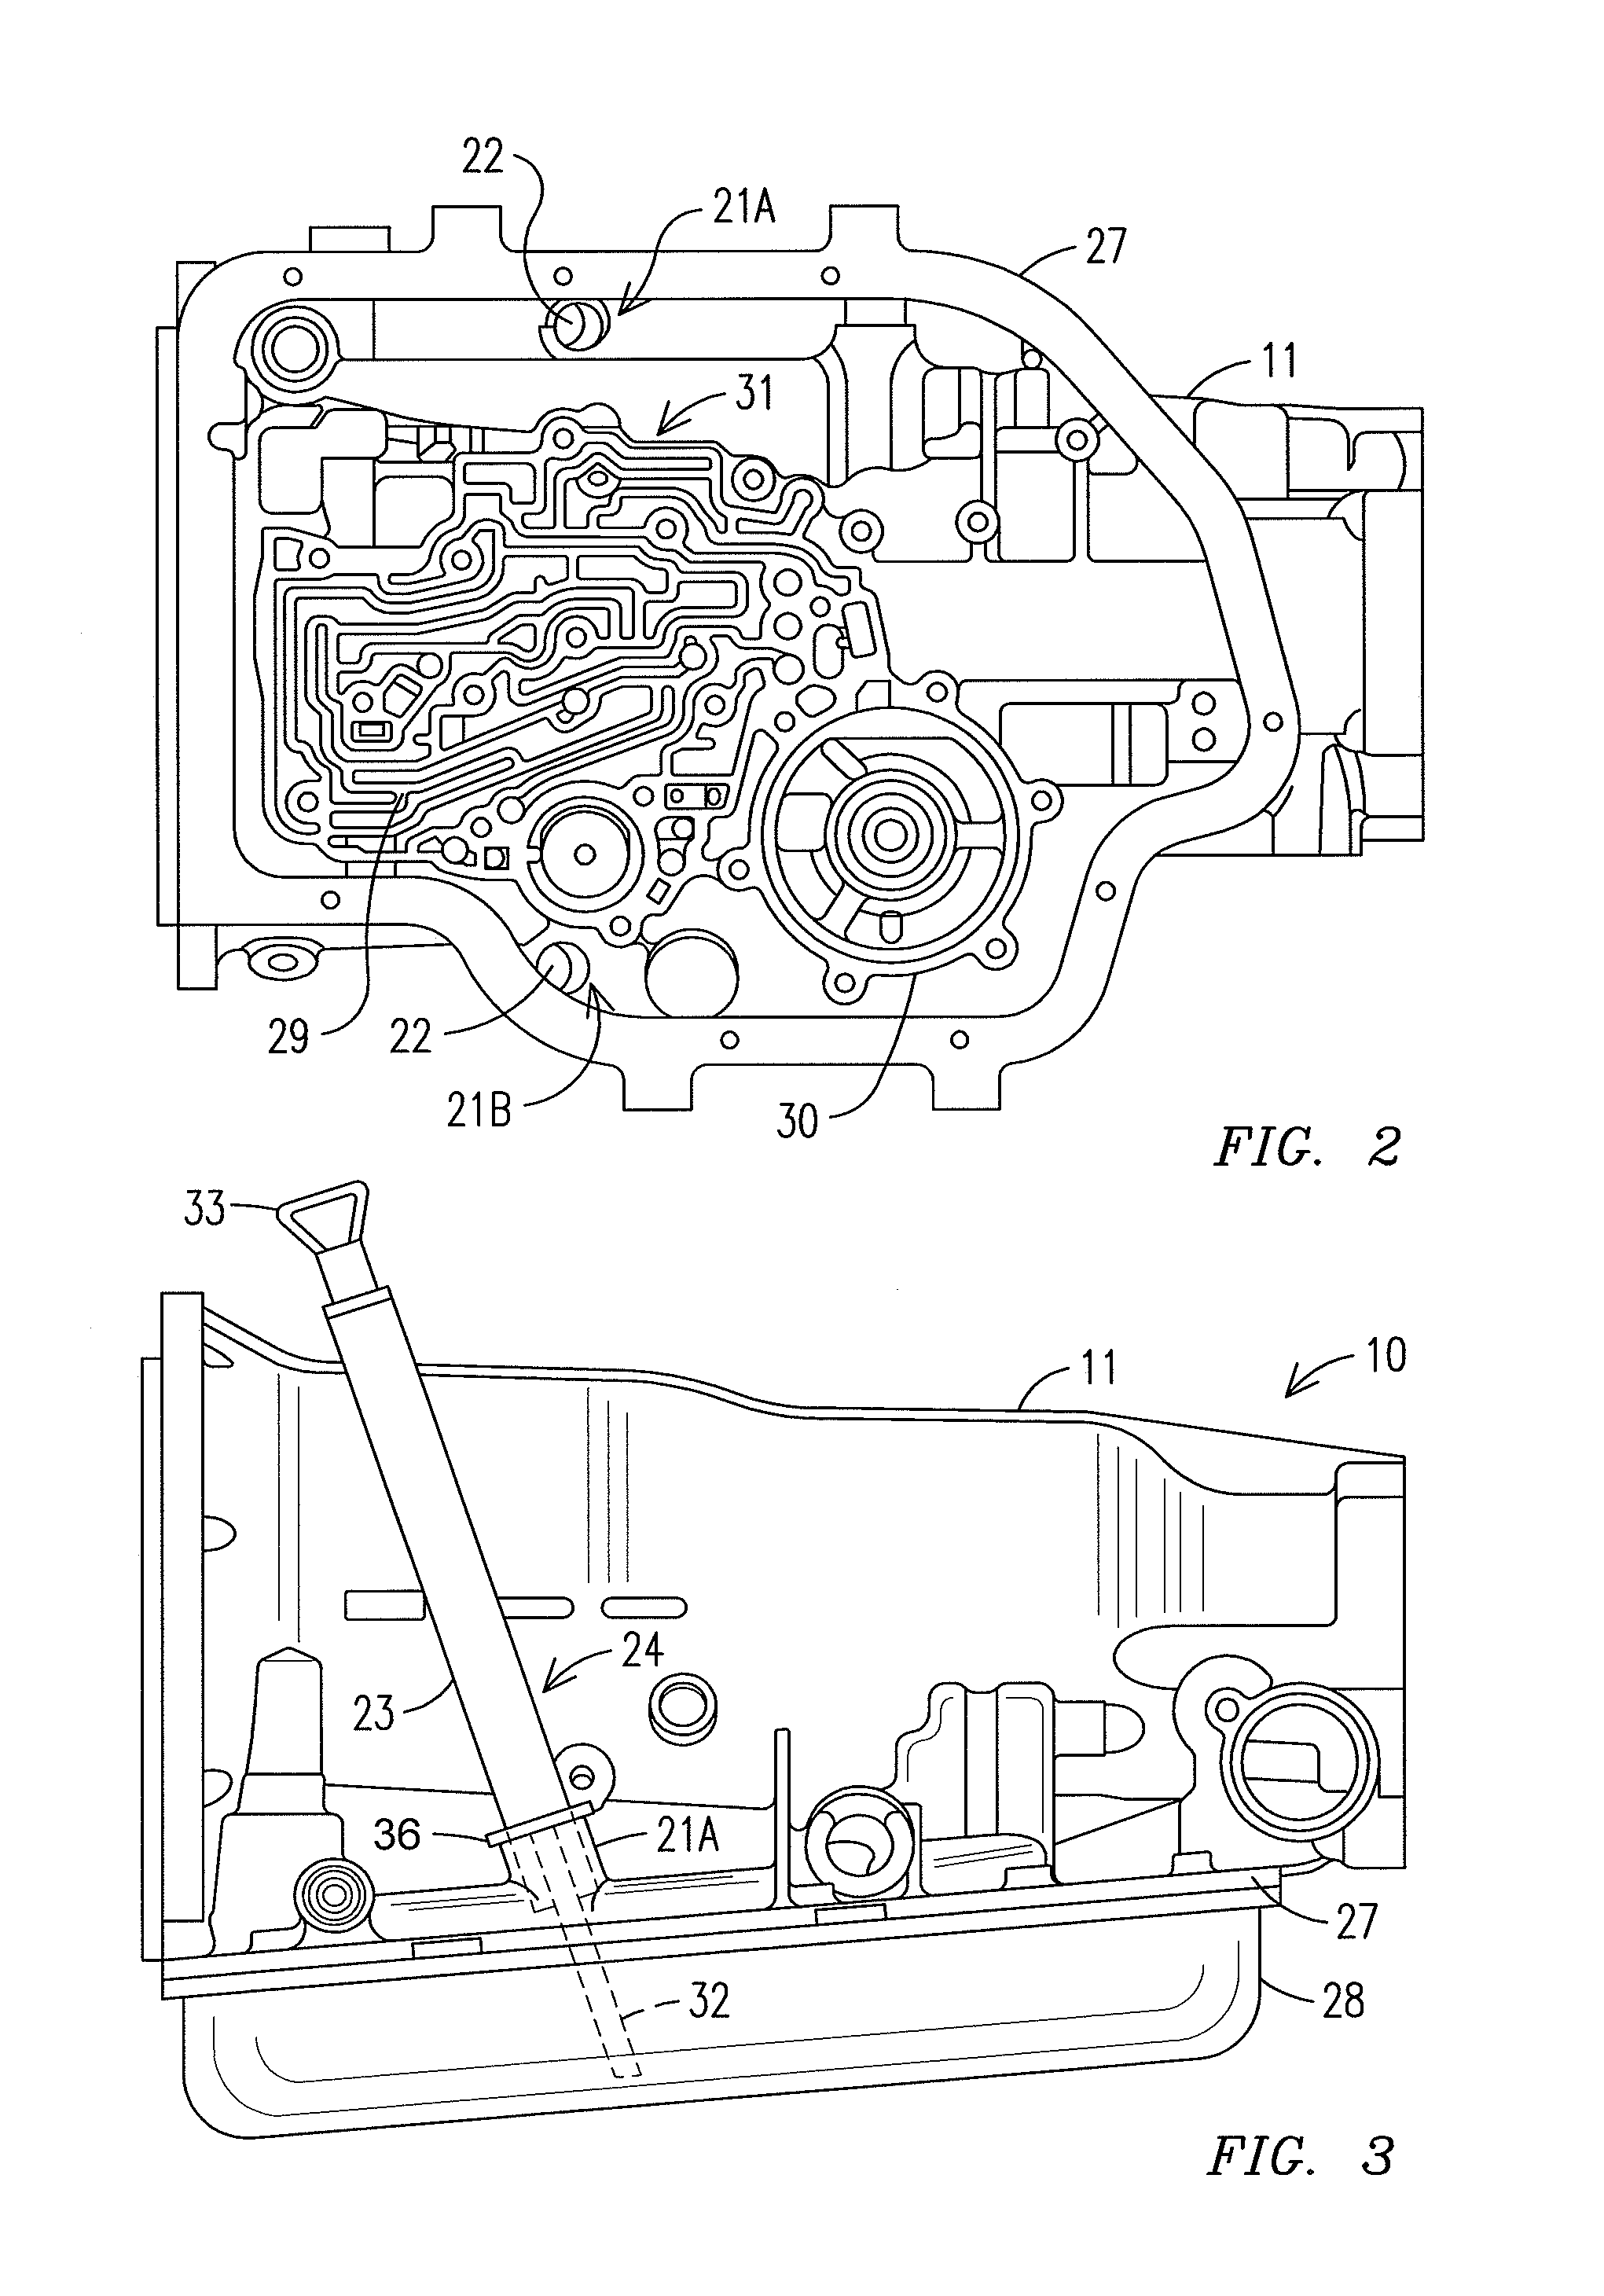 Transmission and transmission housing with multiple dipsticks and dipstick apertures, circumferentially positioned internal lugs and an adjacent fluid inlet port